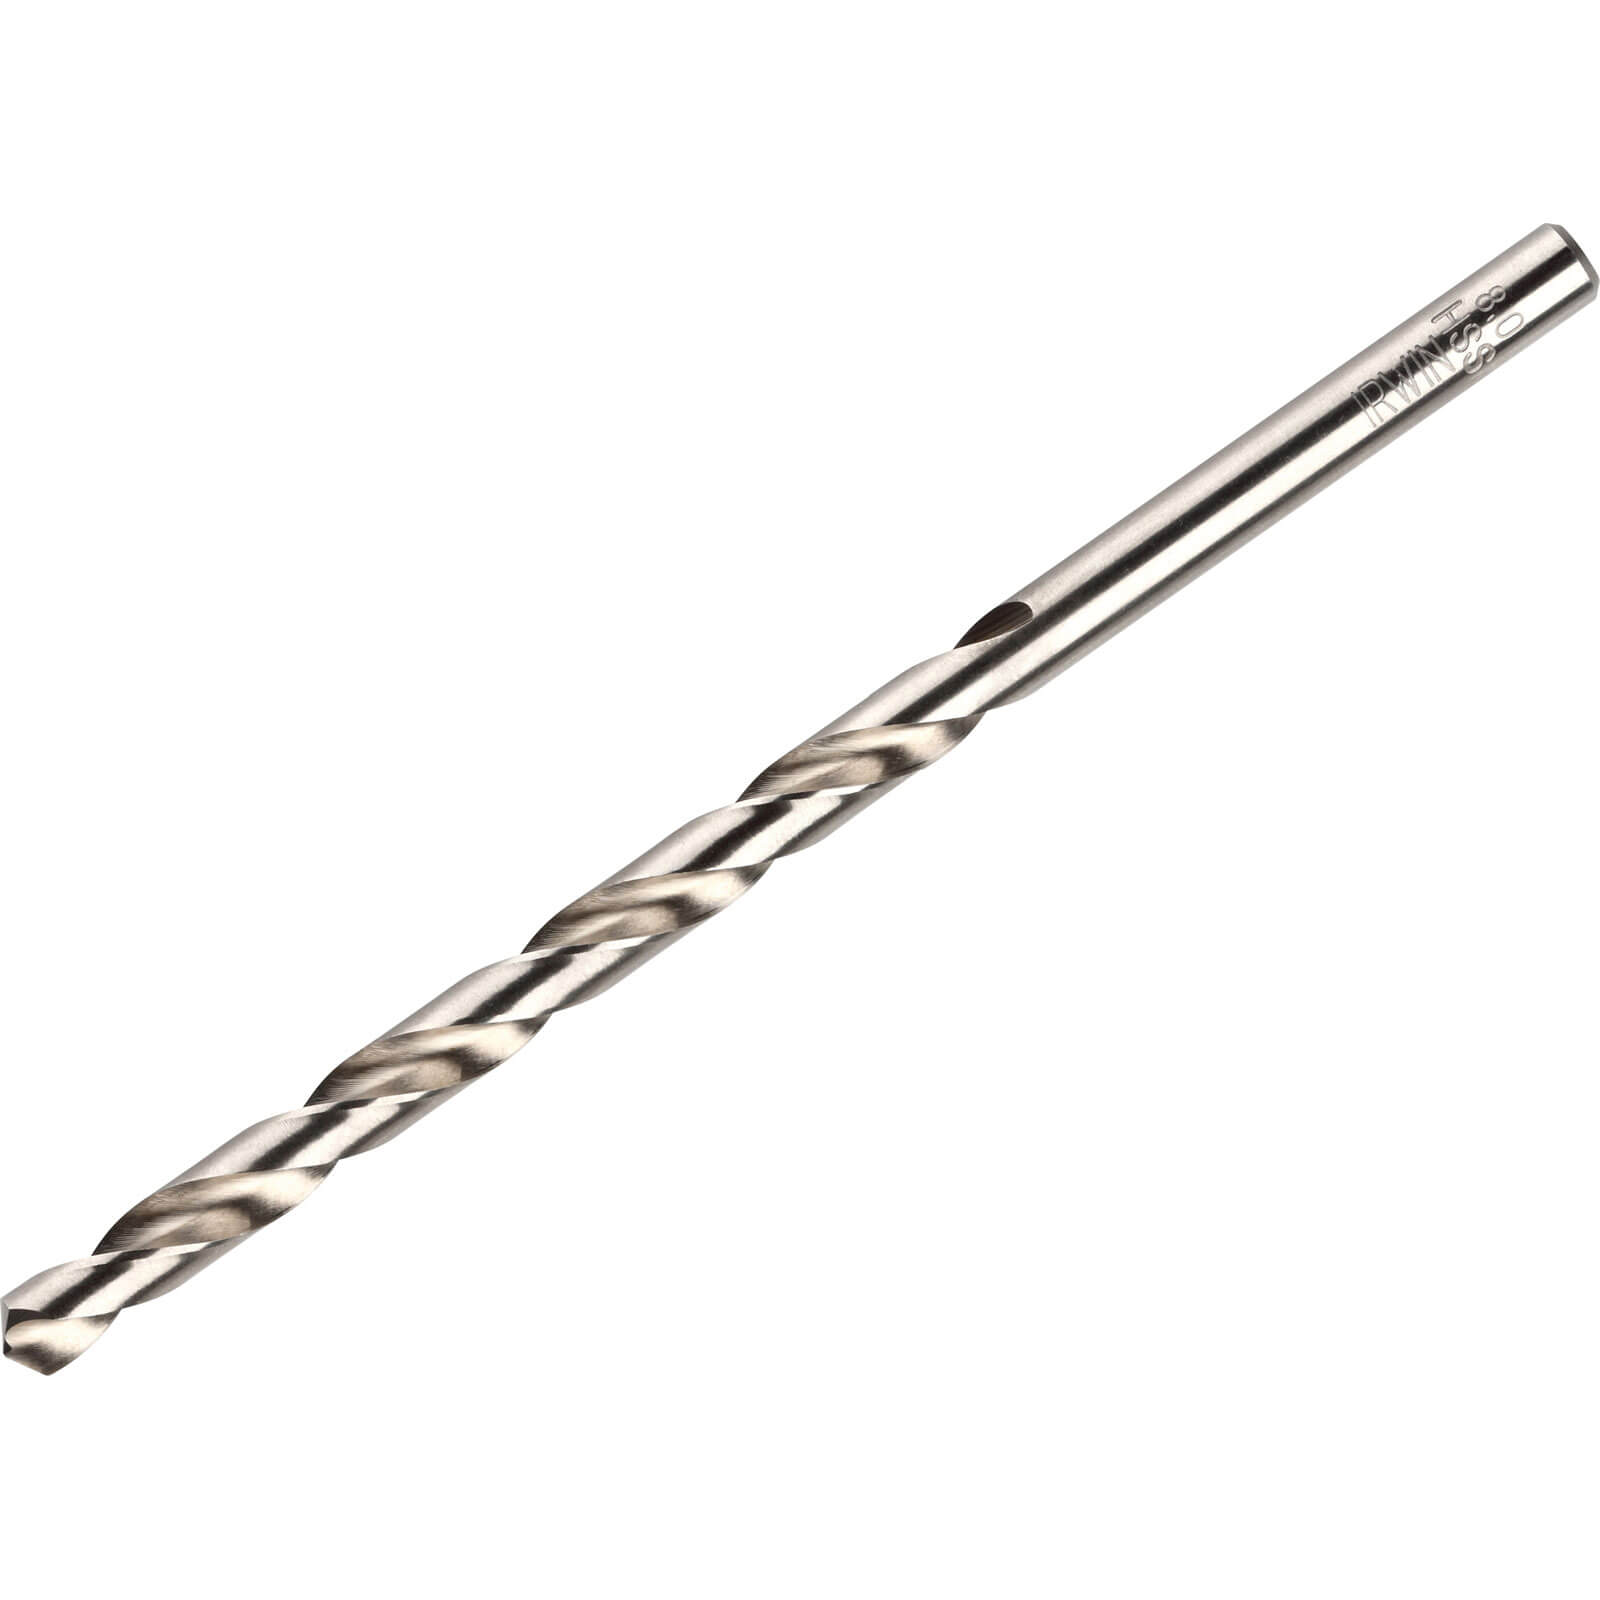 Photo of Irwin Hss Pro Drill Bits 6mm Pack Of 10